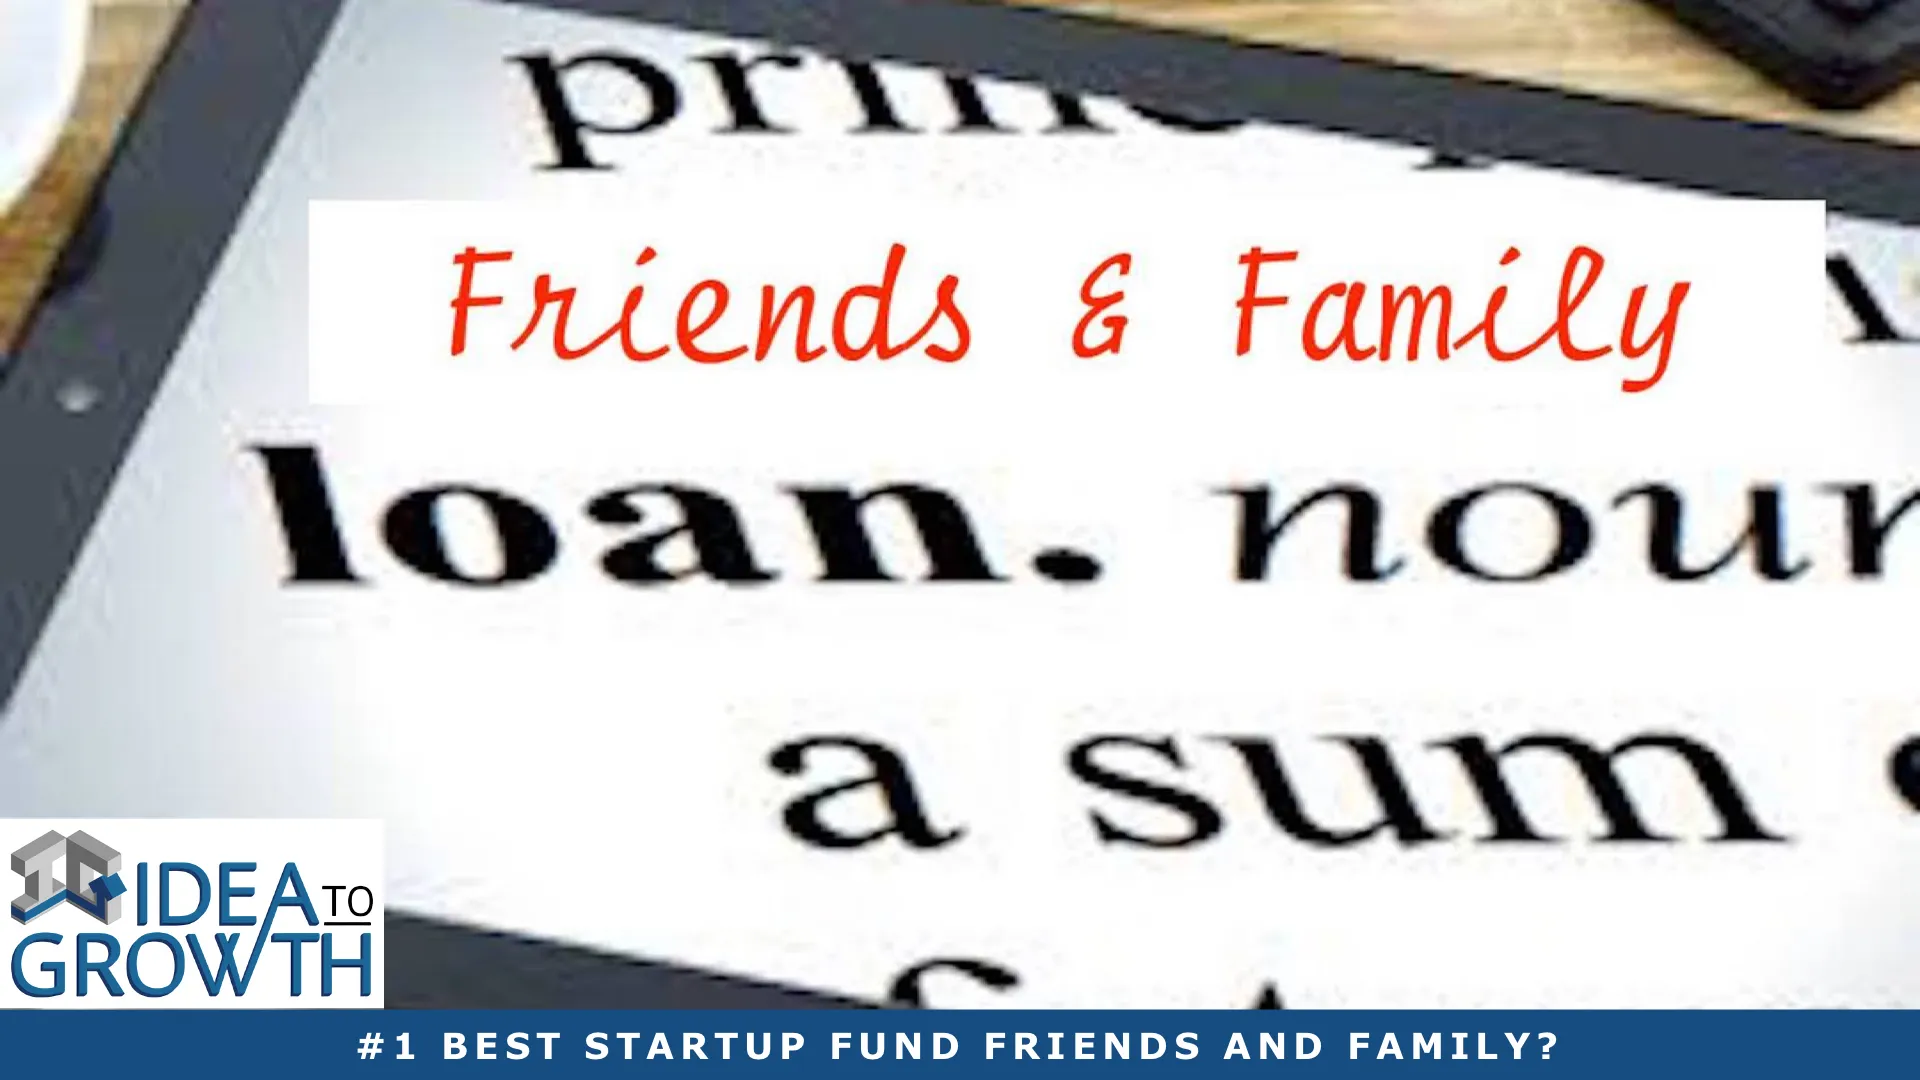 1 BEST STARTUP FUND FRIENDS AND FAMILY